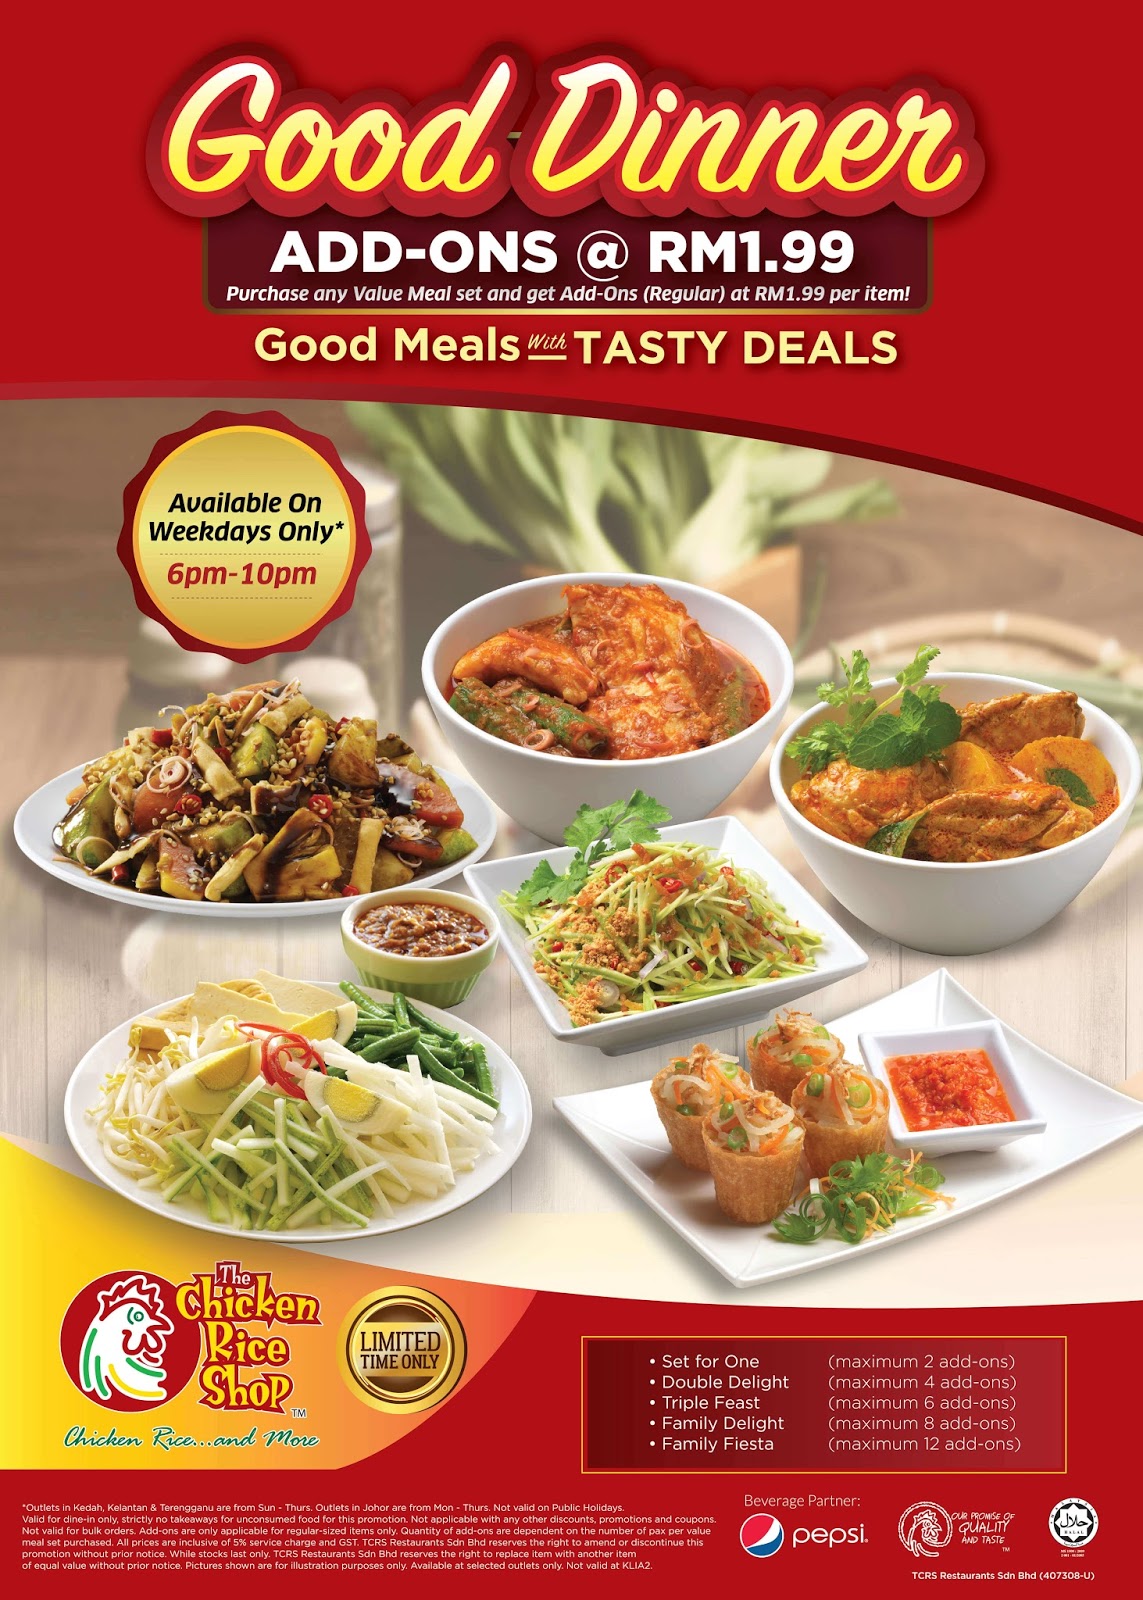 The Chicken Rice Shop Dinner Value Meal Set Add-on RM1.99/Item 6PM